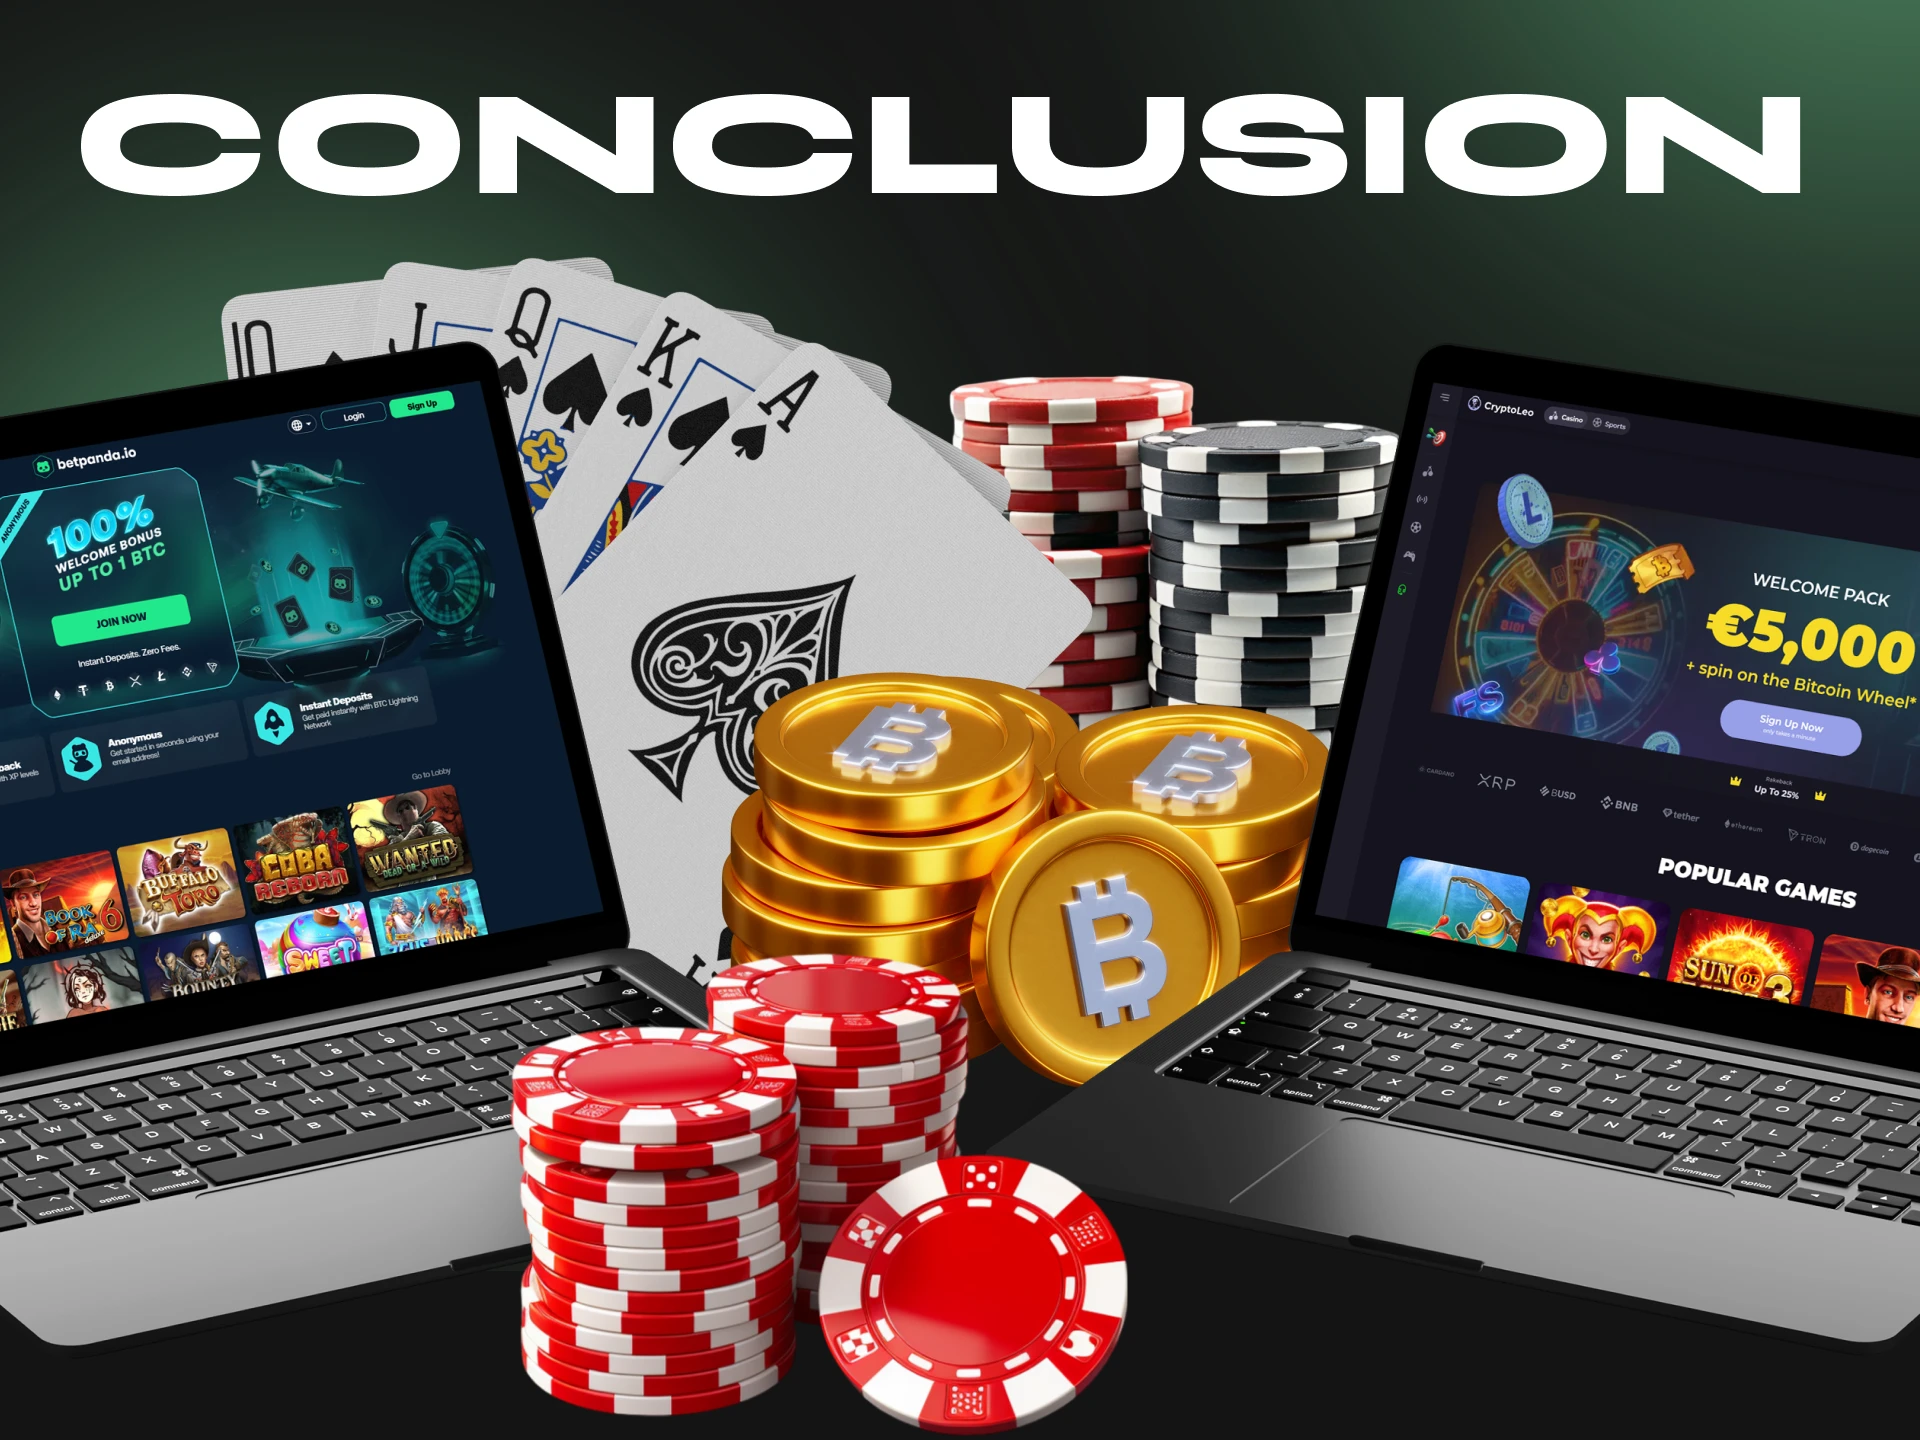 If you like blackjack, try playing this game with cryptocurrency.